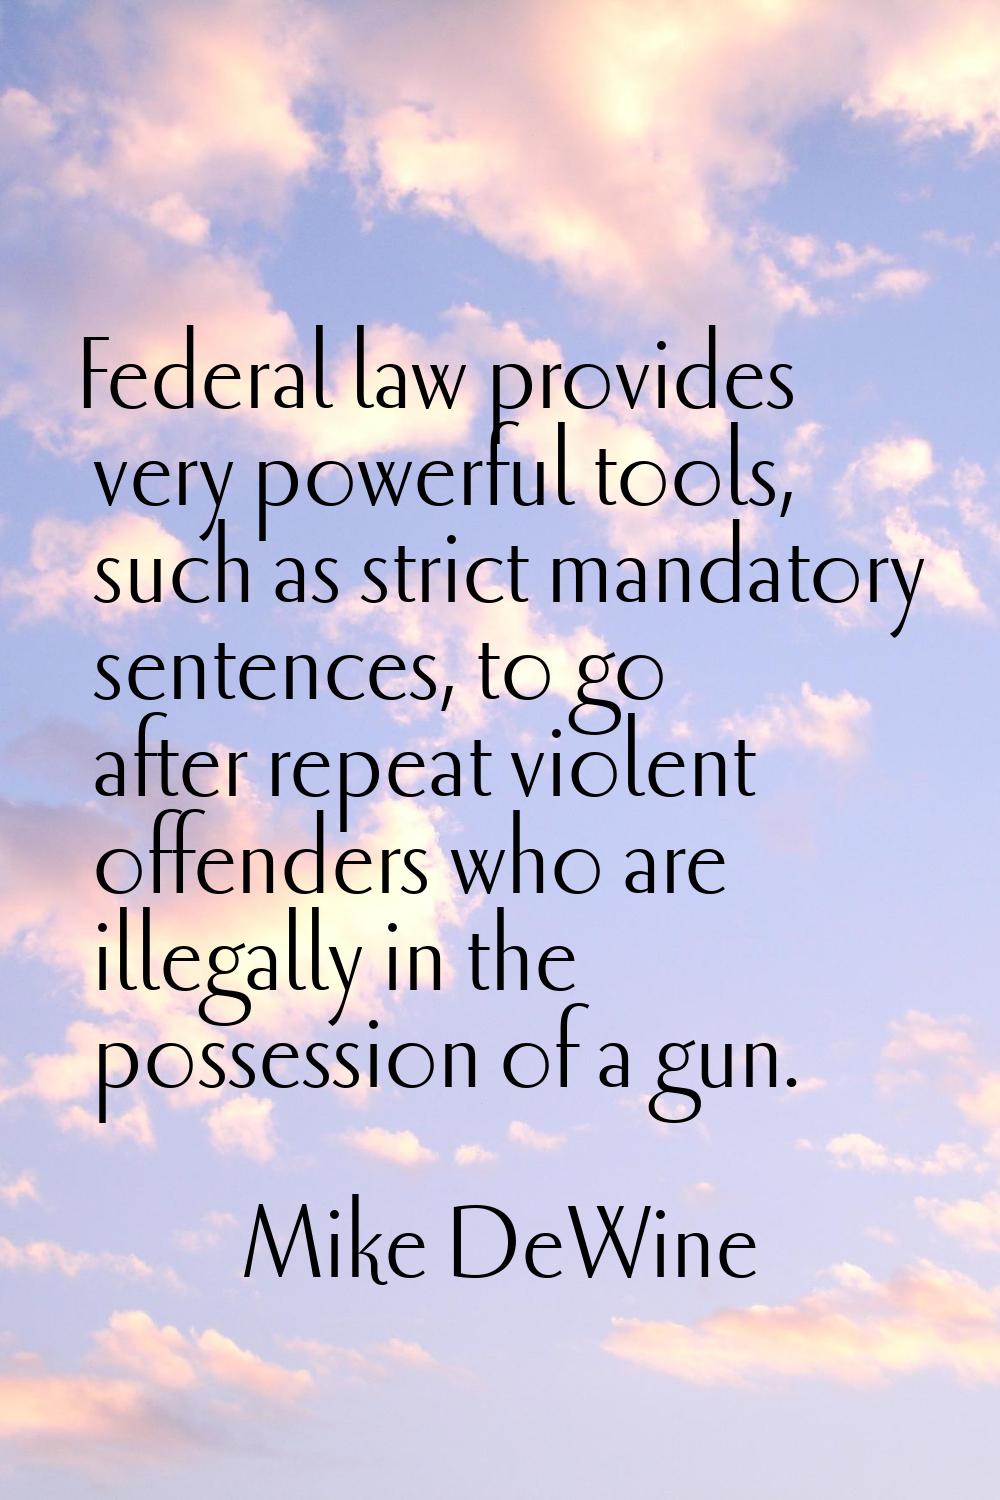 Federal law provides very powerful tools, such as strict mandatory sentences, to go after repeat vi